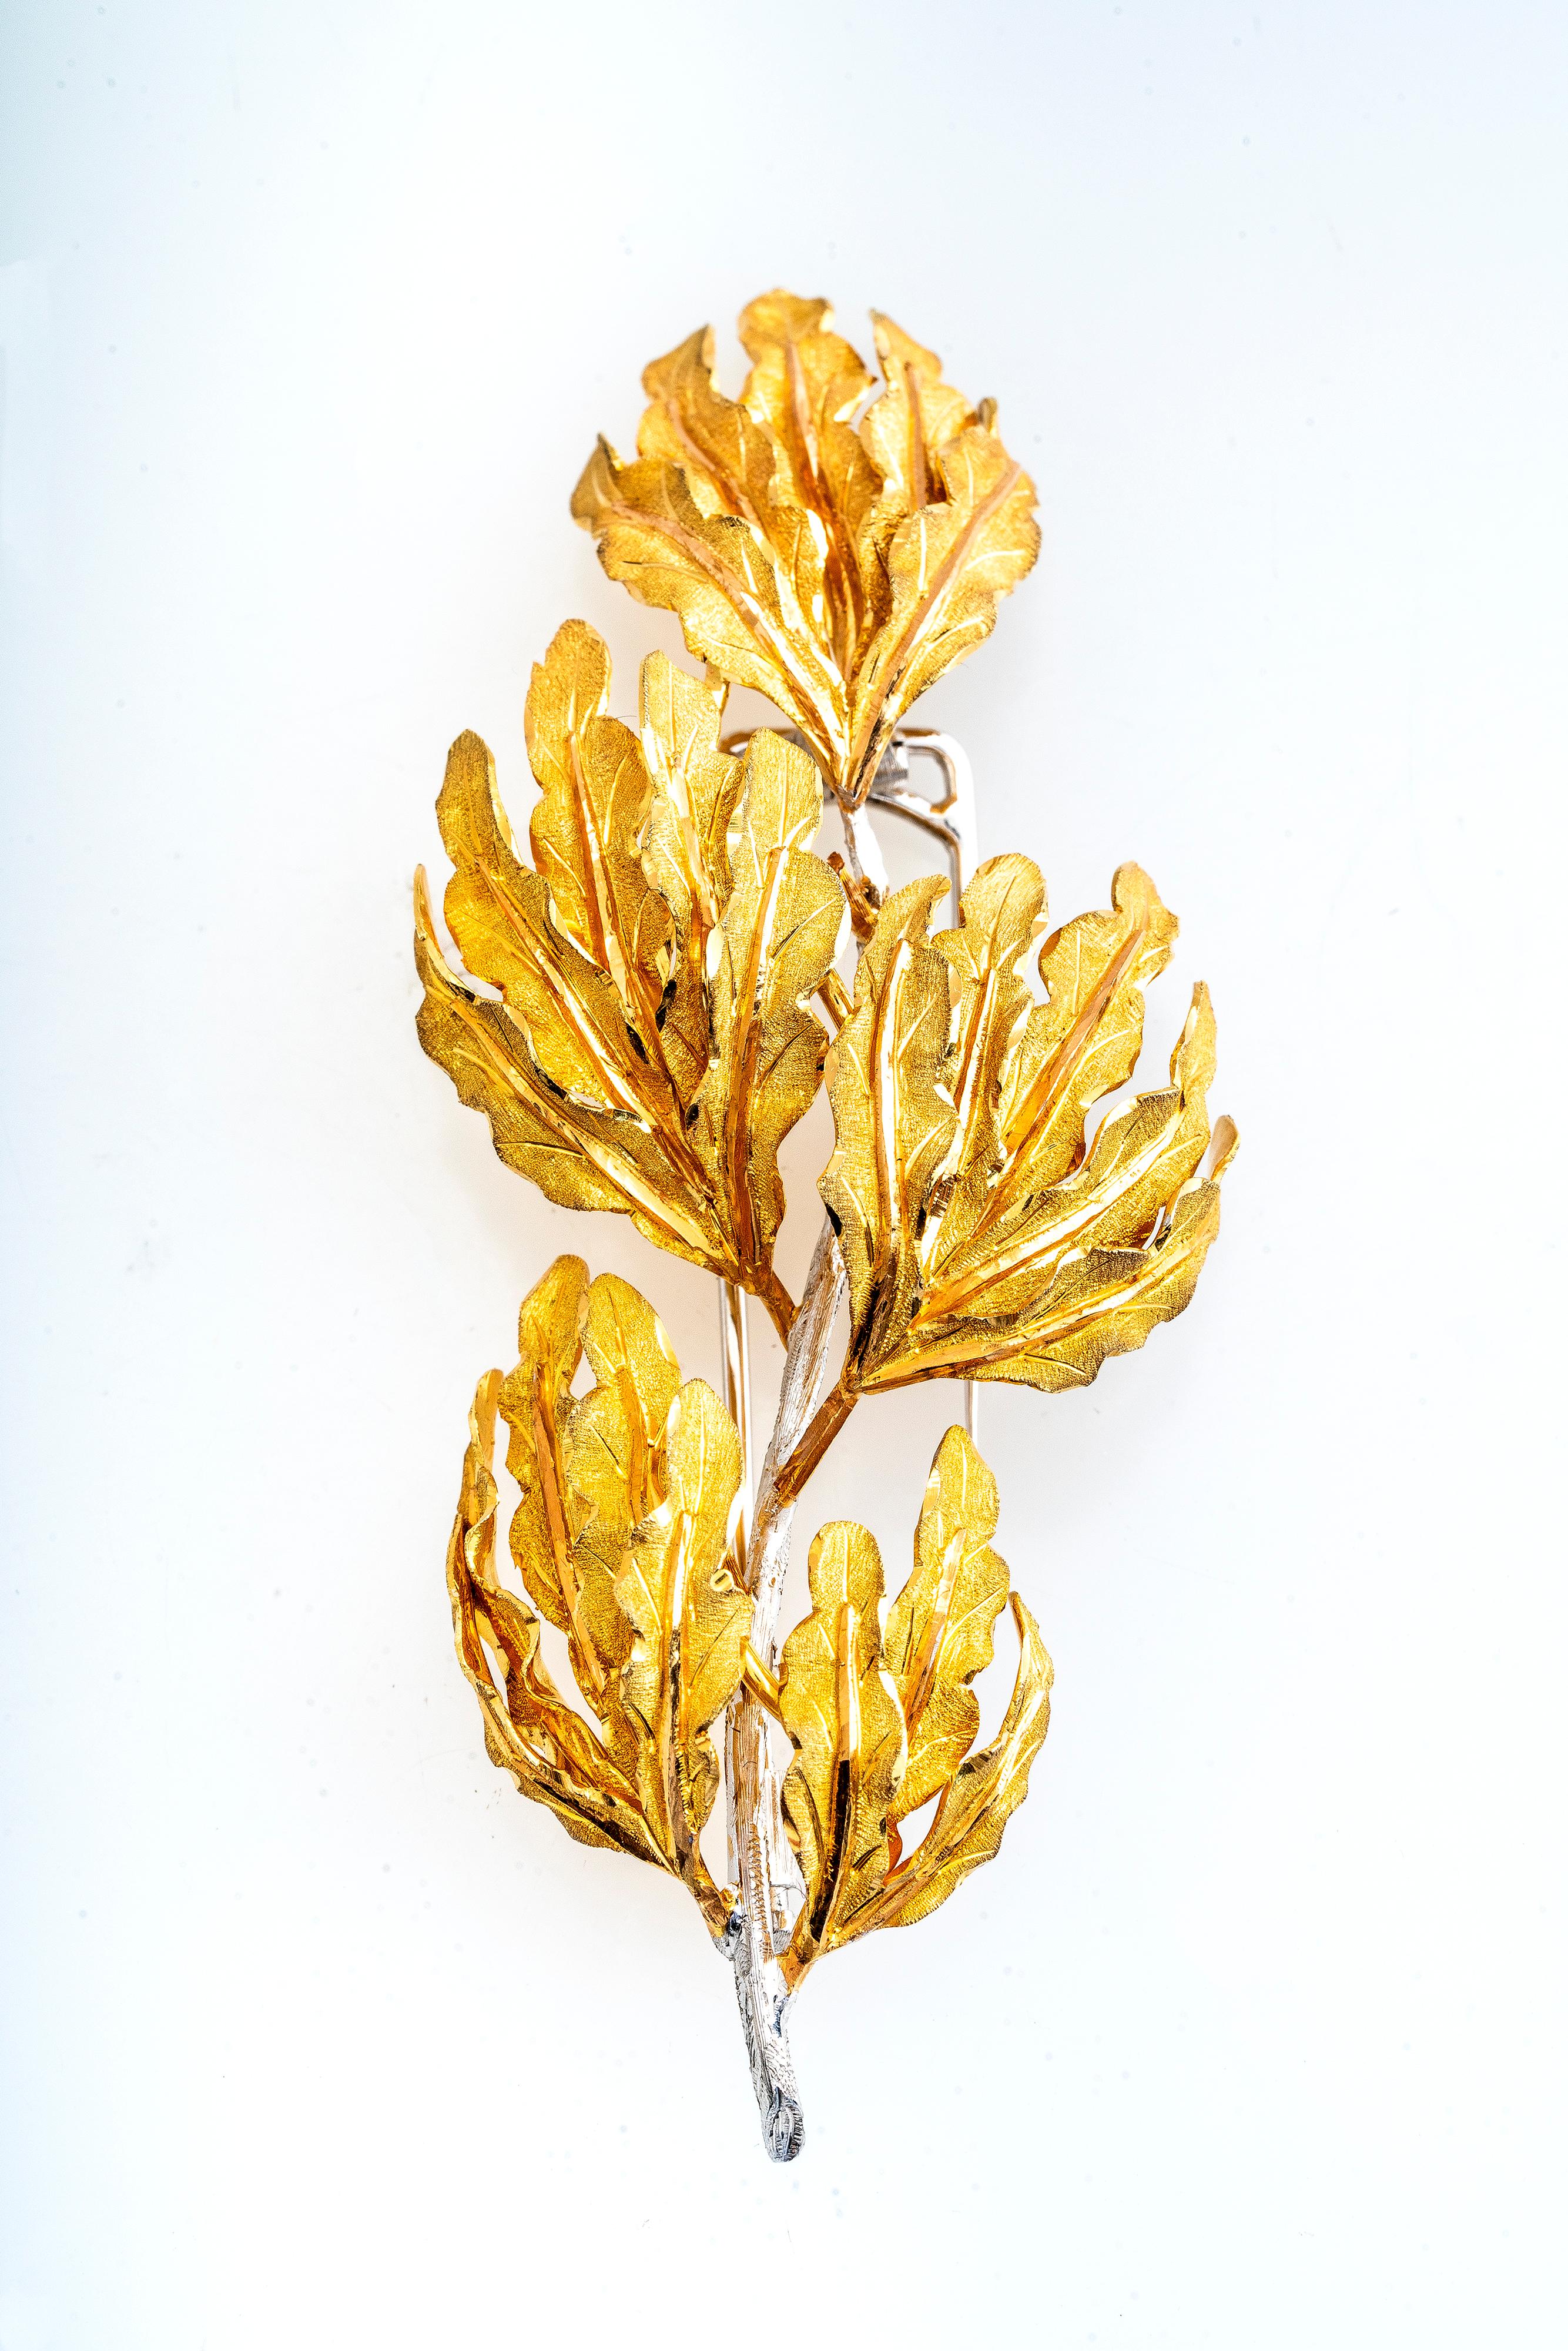 Vintage 18k yellow and white gold oak leaf brooch and fur pin by Italian design house, Buccellati.   Beautiful and intricate detailing with refined craftsmanship.  Buccellati had been creating works of art for over 100 years and their distinctive